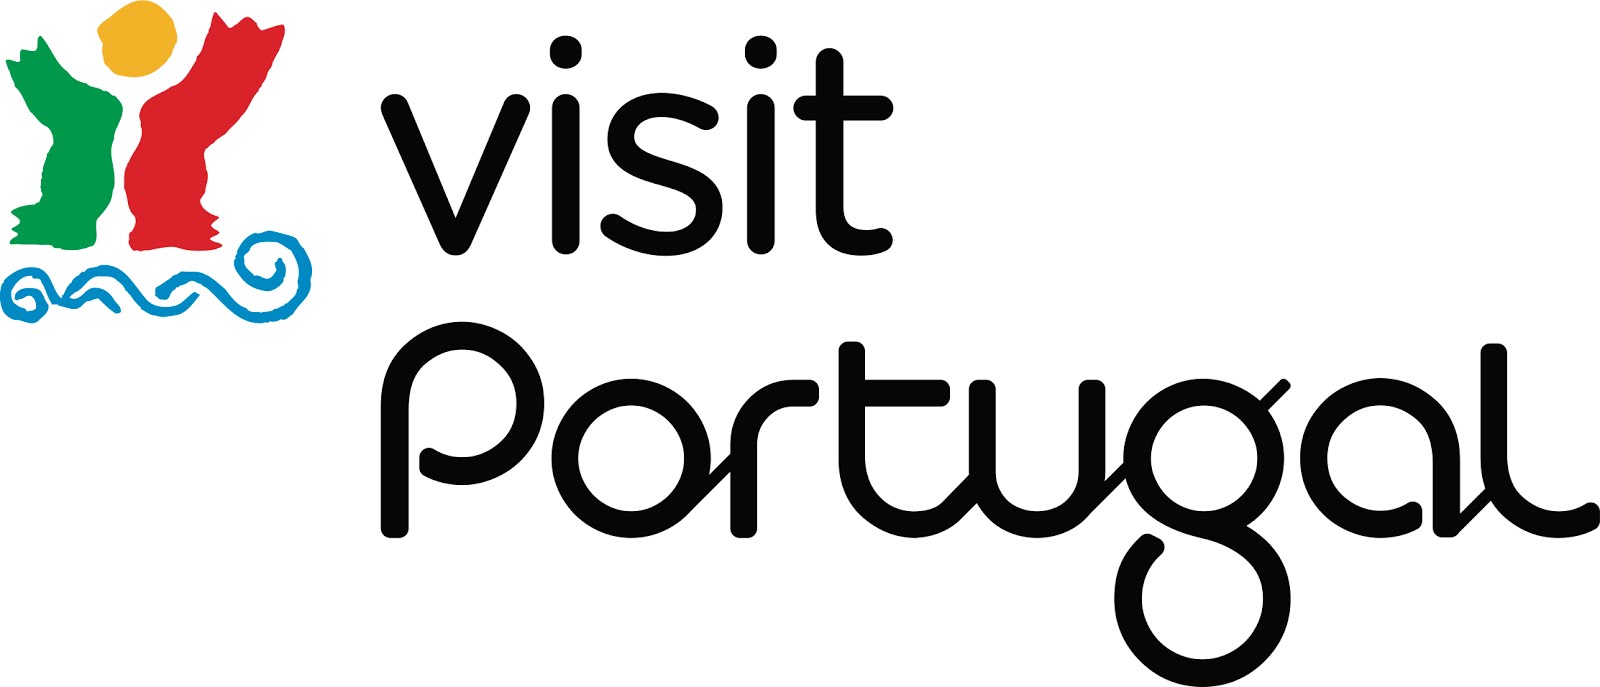 More about Portugal